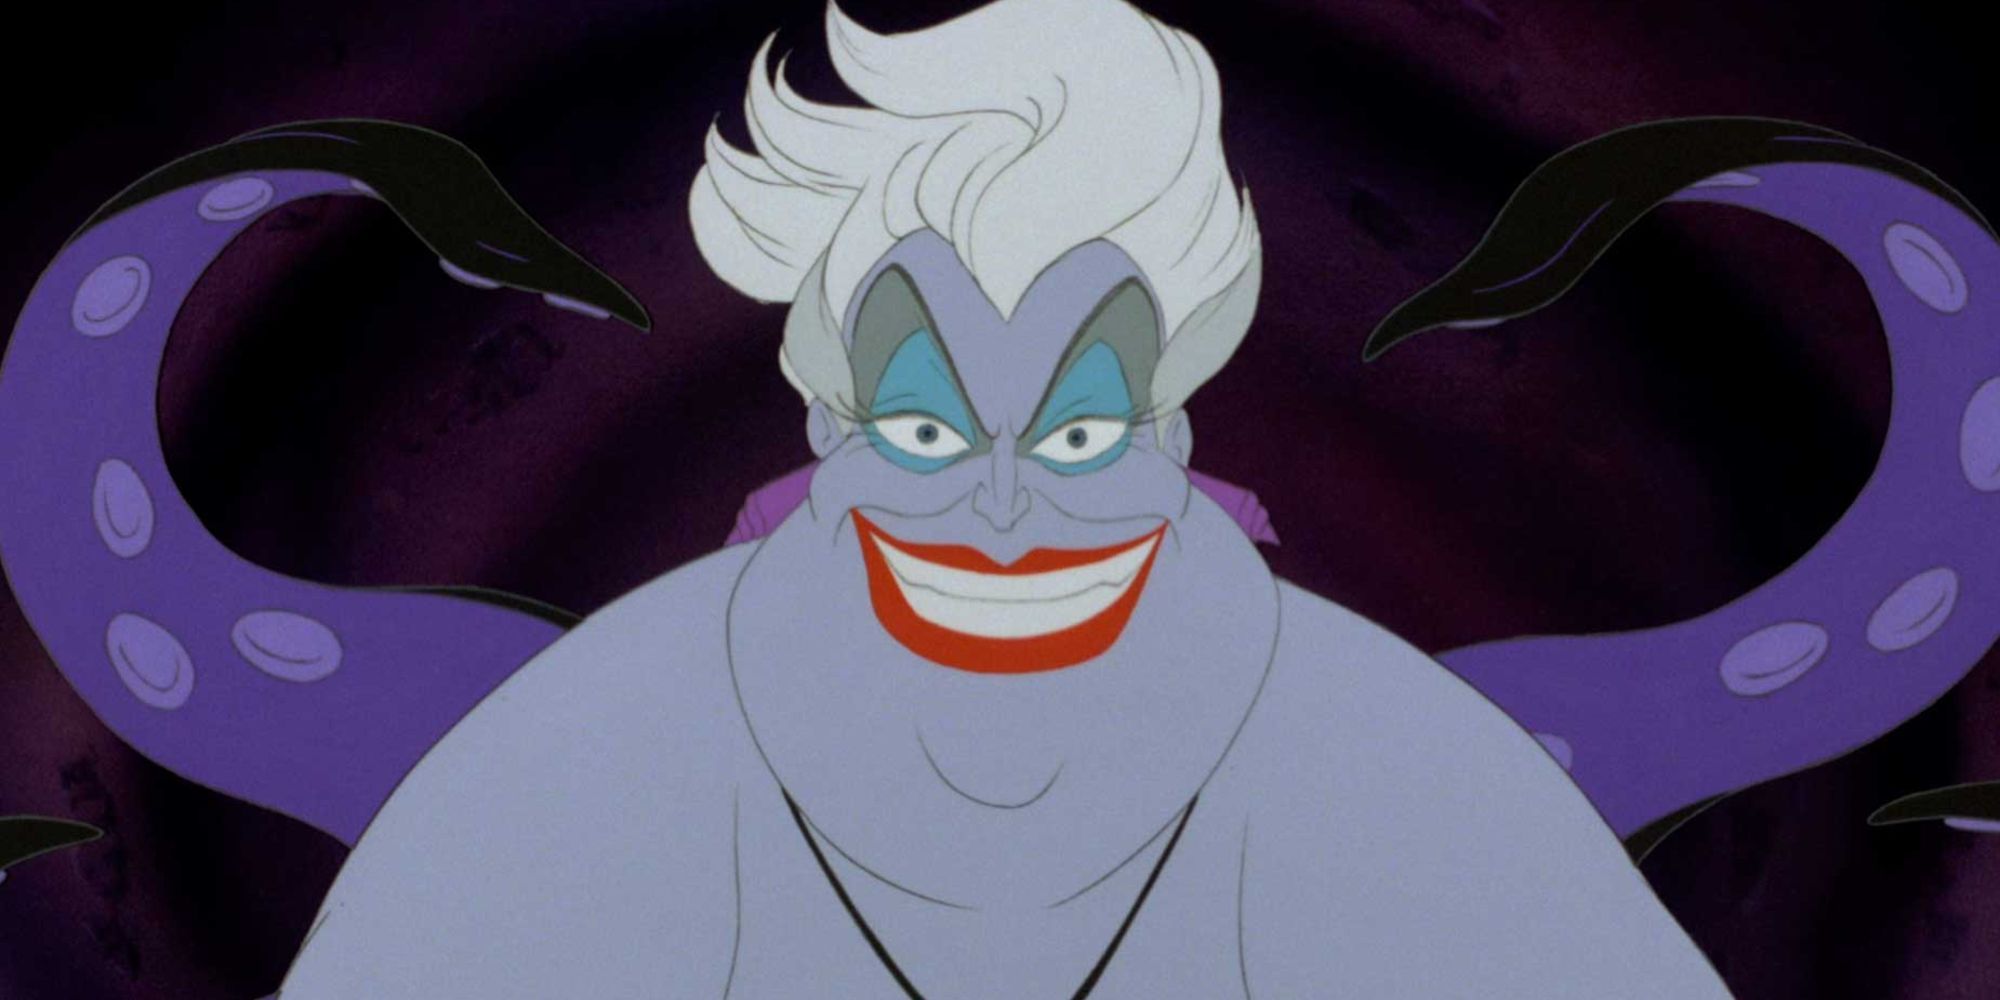 Ursula smiling with her tentacles moving behind her in The Little Mermaid